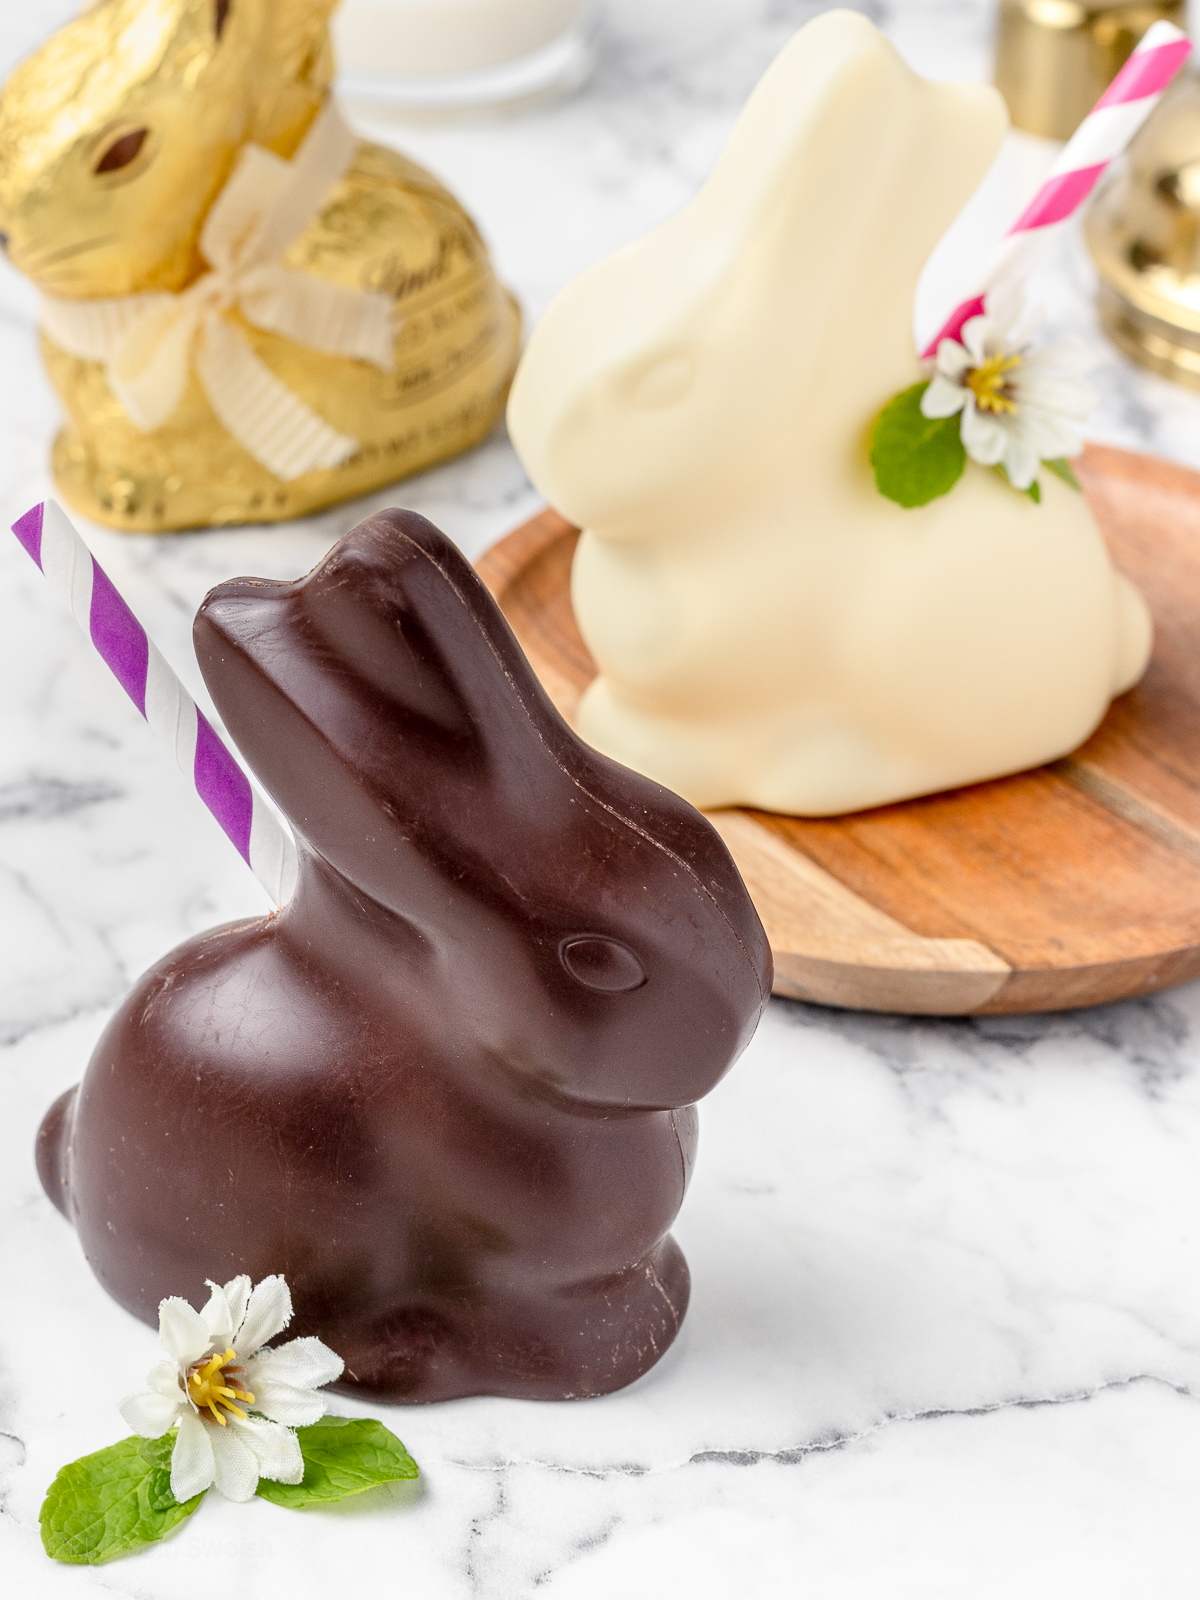 A milk chocolate bunny mocktail with a white chocolate bunny mocktail in the background. They are garnished with colorful striped straws, mint leaves, and edible flowers.